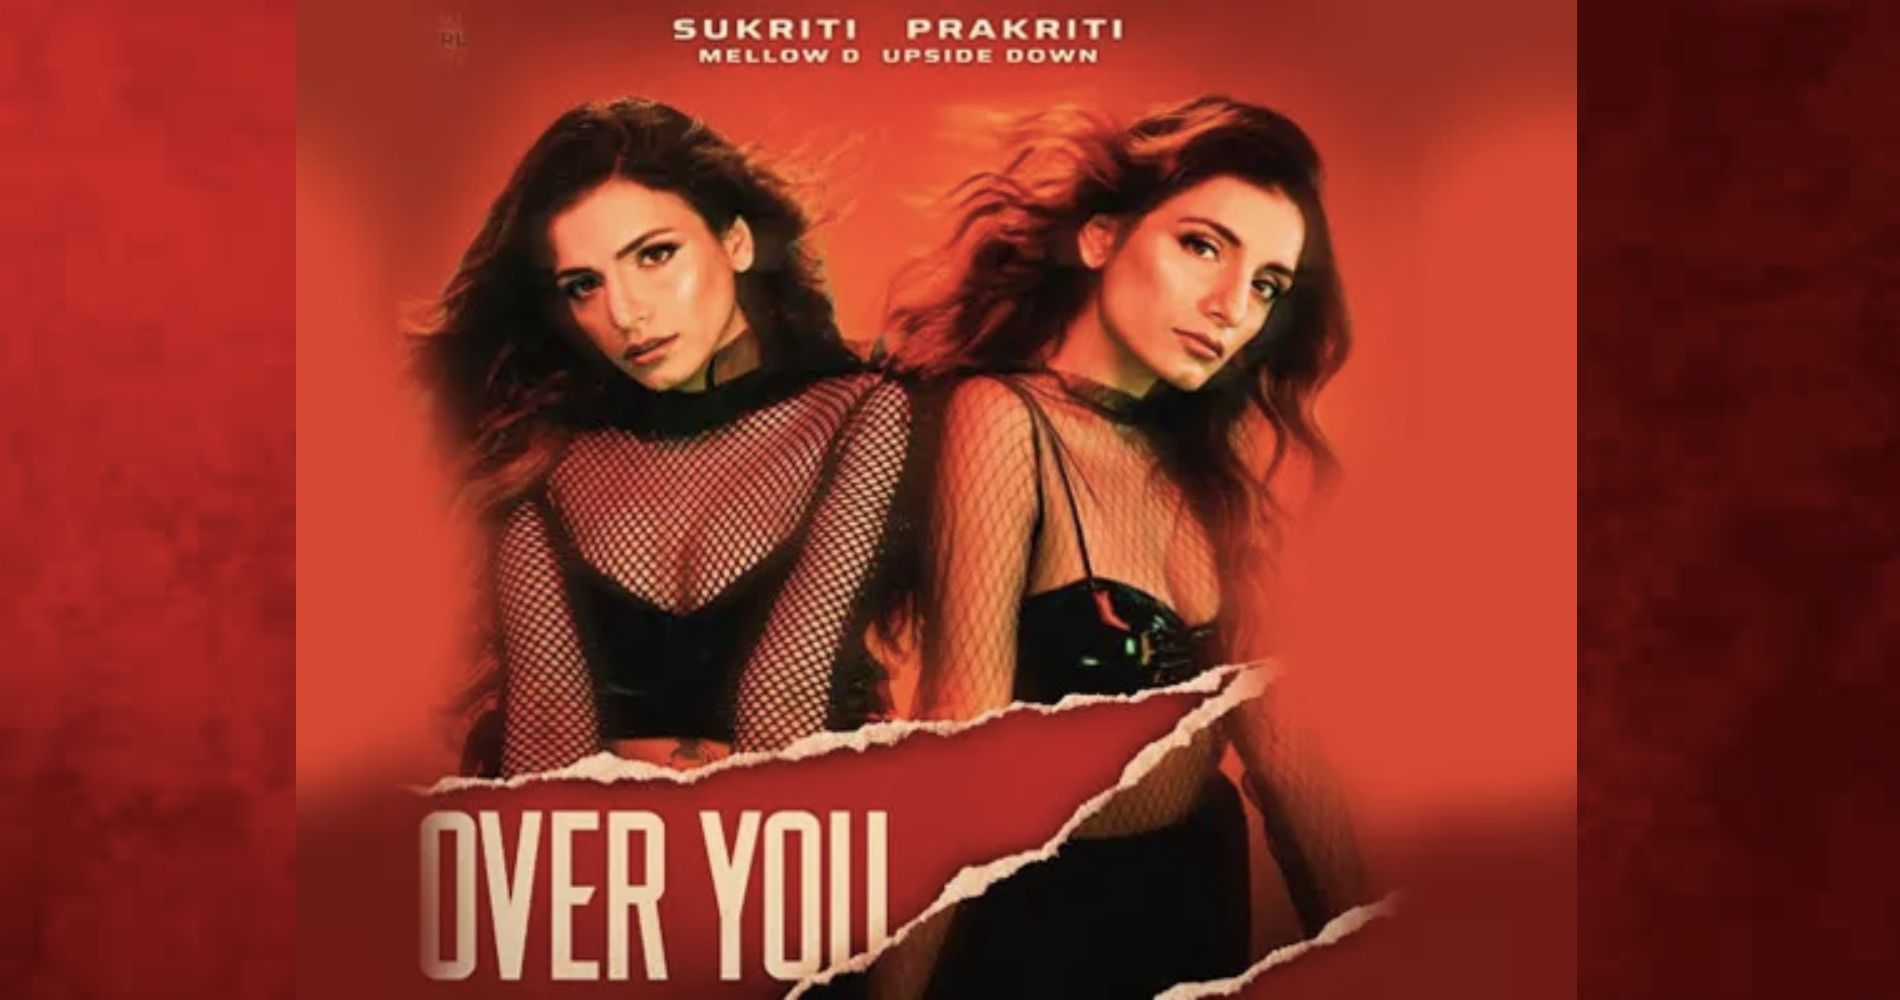 "Sukriti – Prakriti's Mesmerizing Collaboration: "Over You" With Mellow D And Upside Down